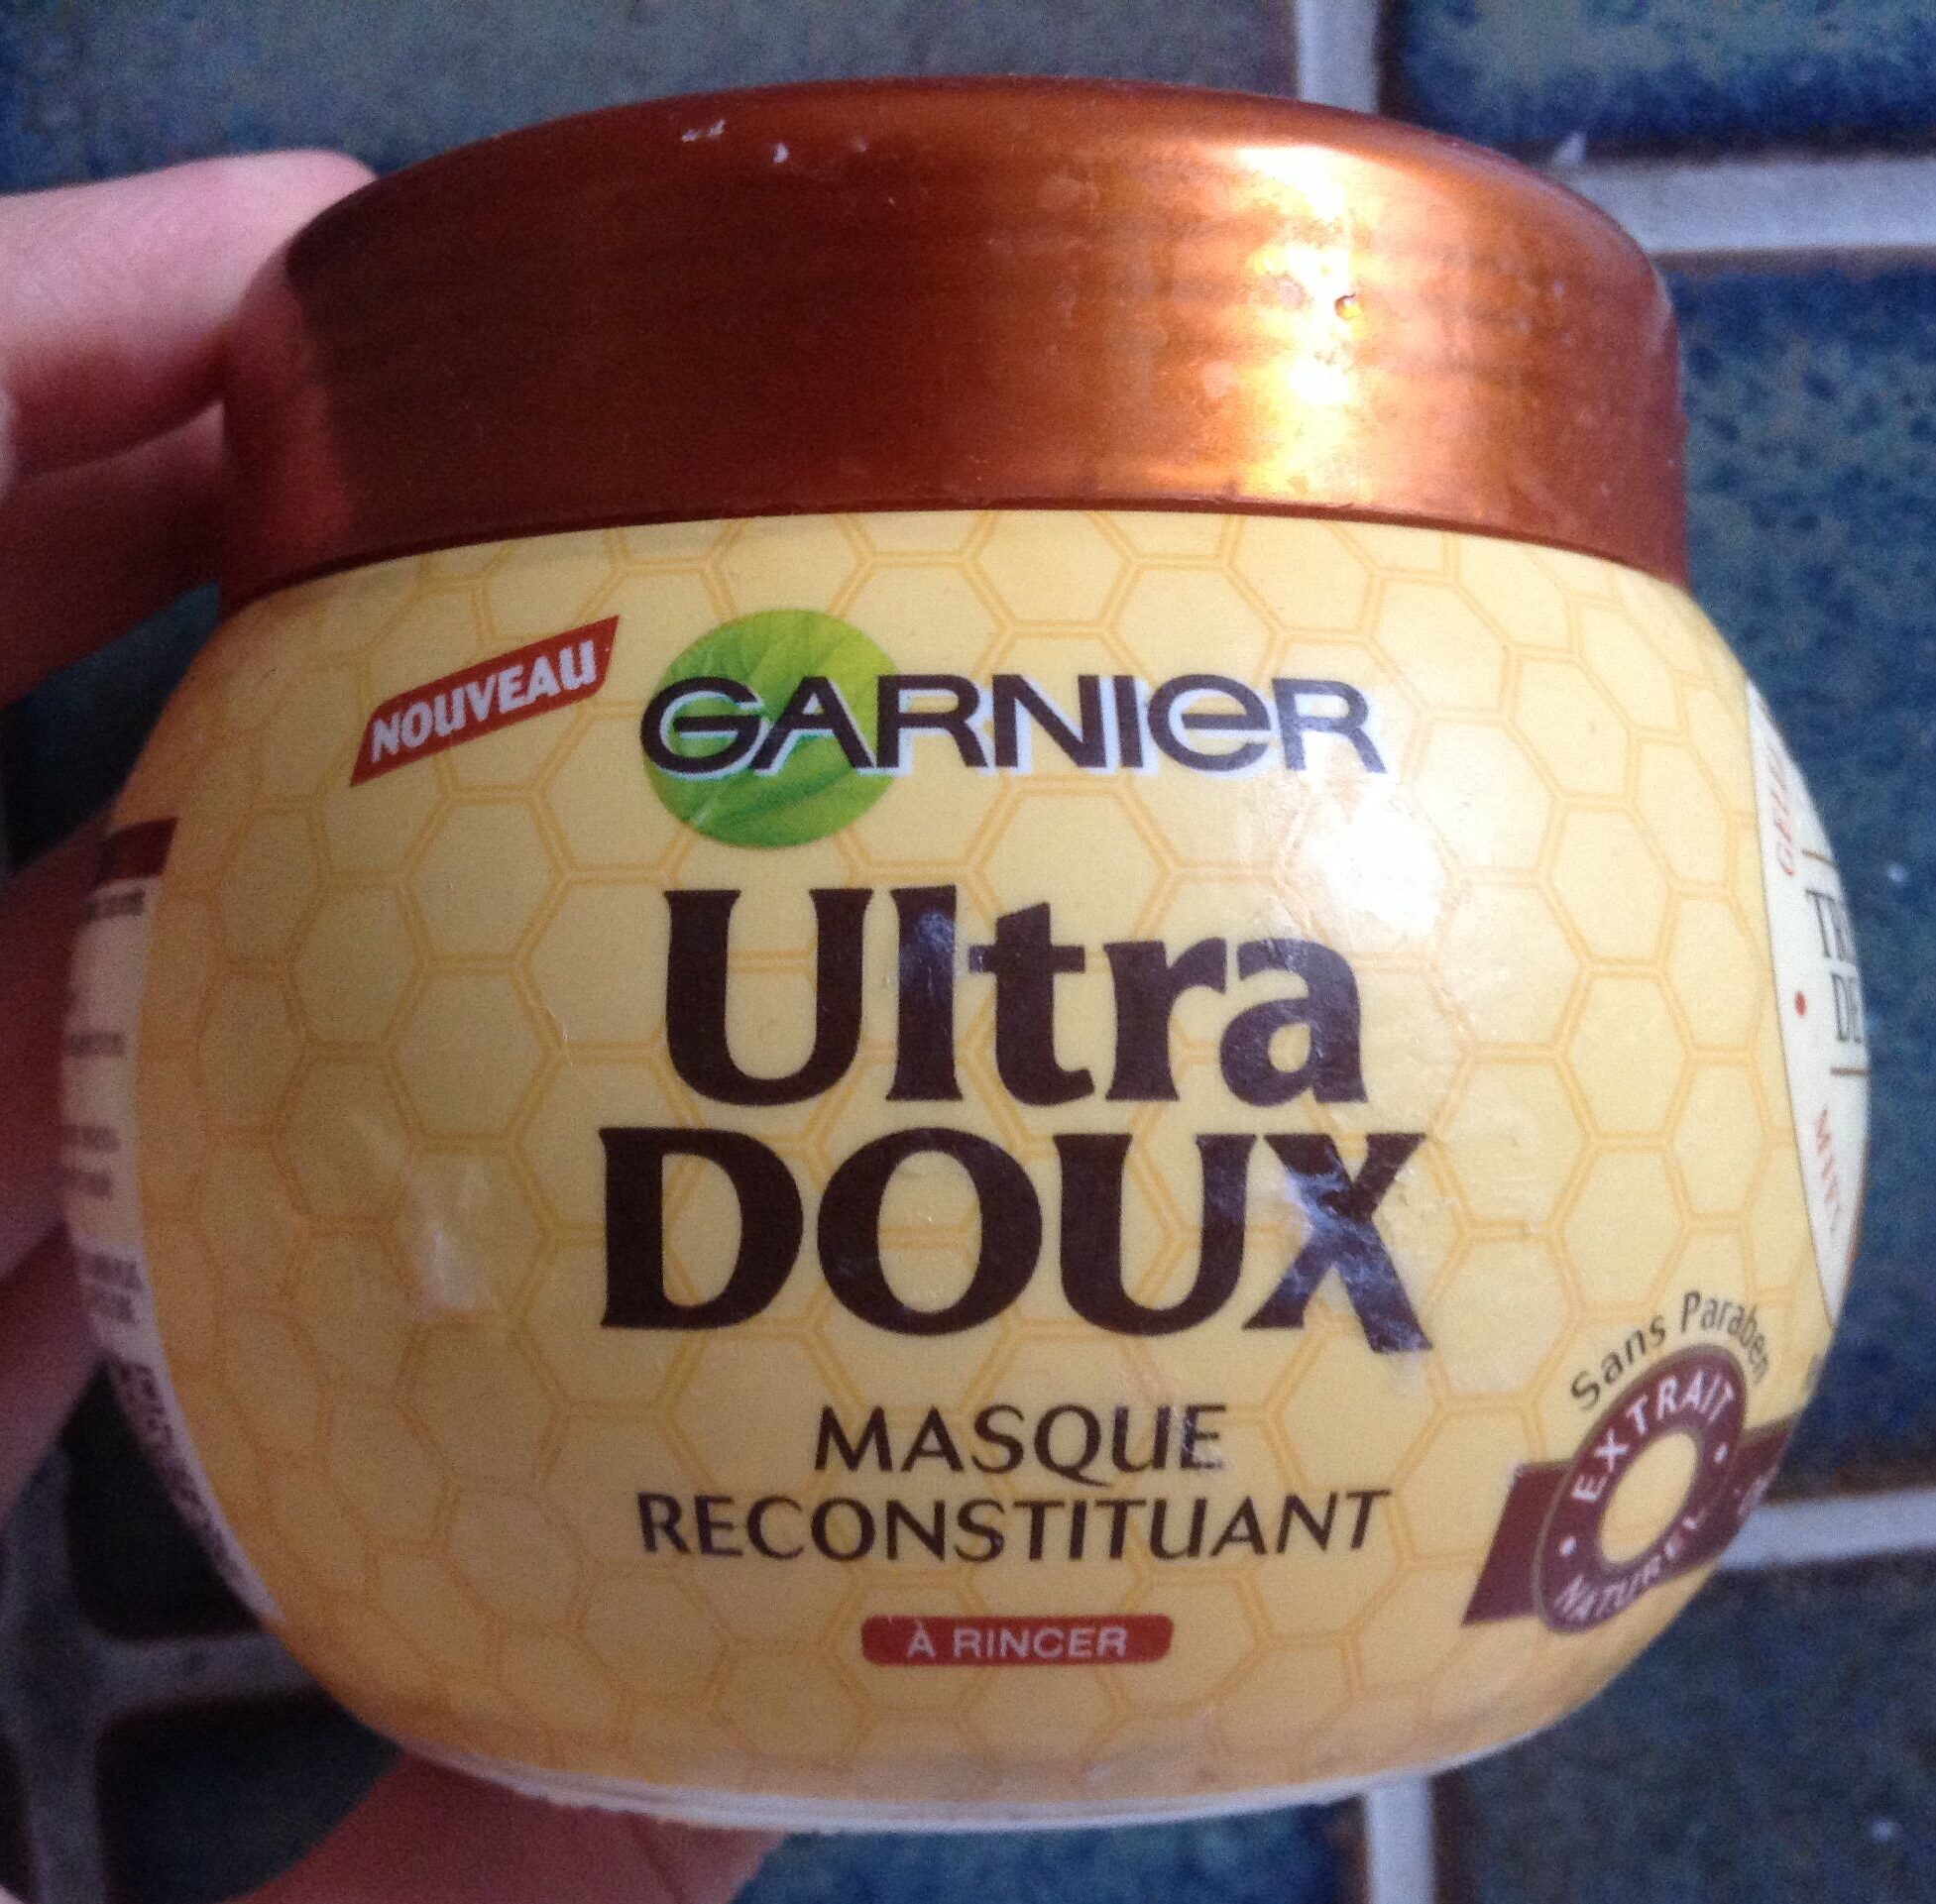 Ultrax doux masque reconstituant - Product - fr